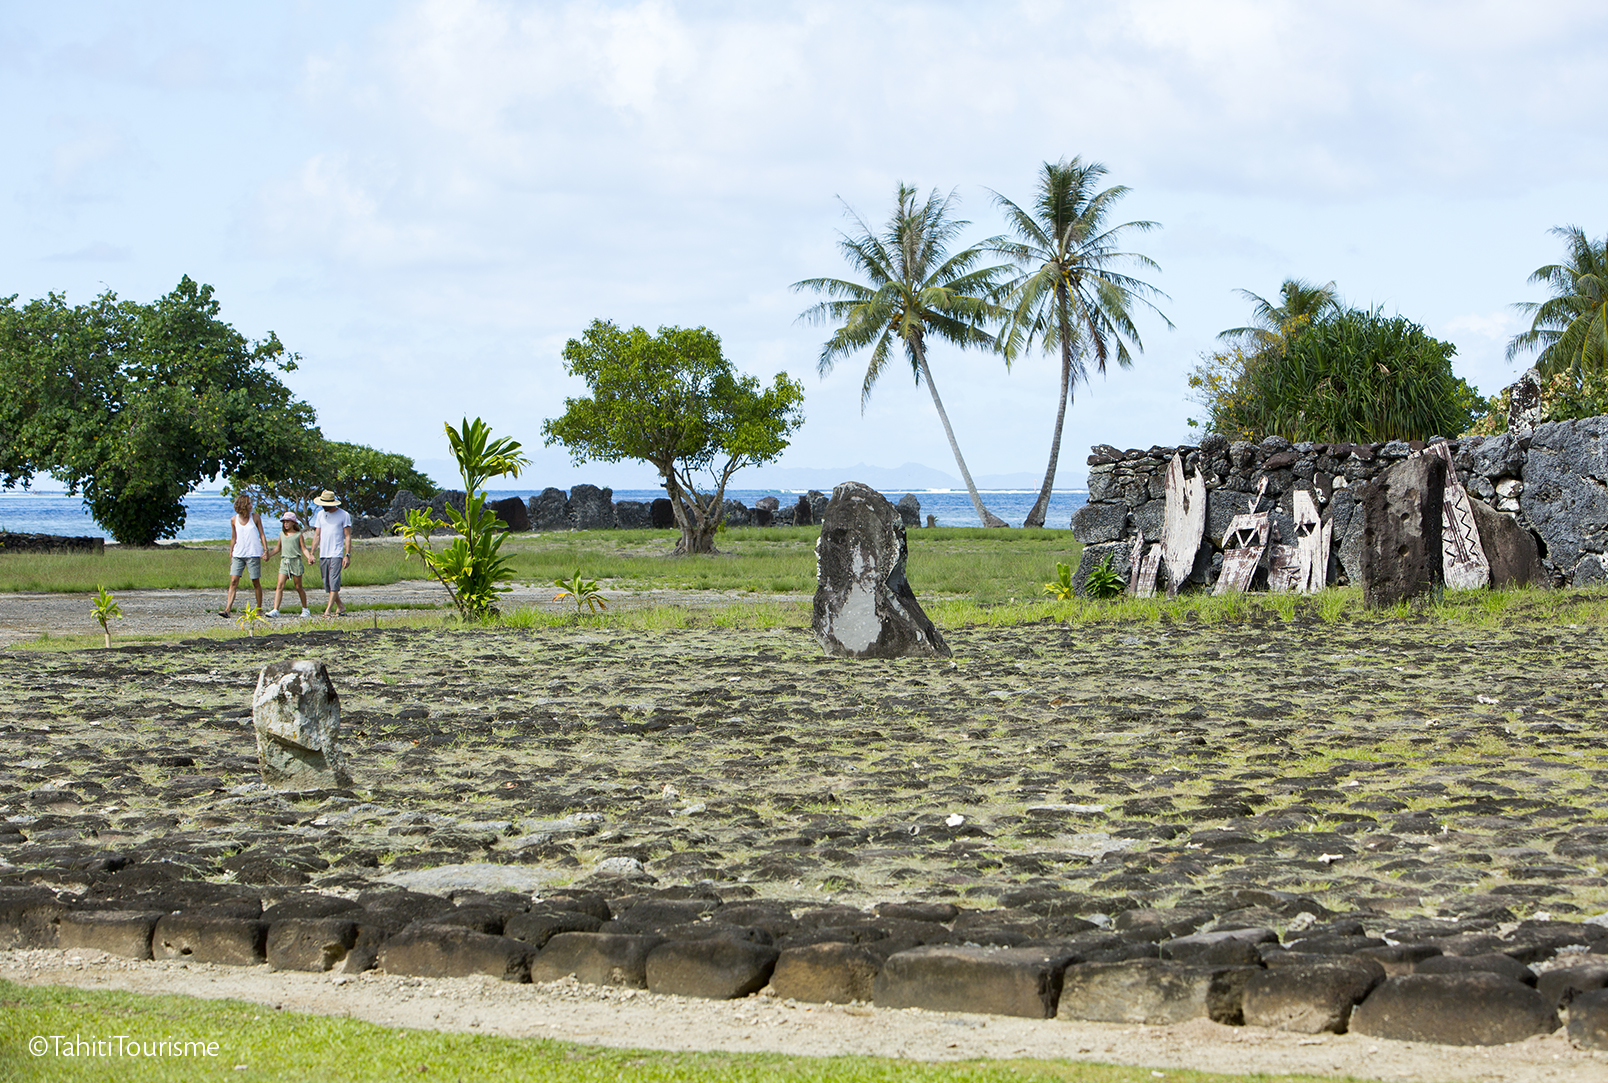 A testimony to 1,000 years of mā'ohi civilization, ancient <em>marae </em>(temples) dot the landscape of Raiatea, the most sacred island in all of Polynesia.